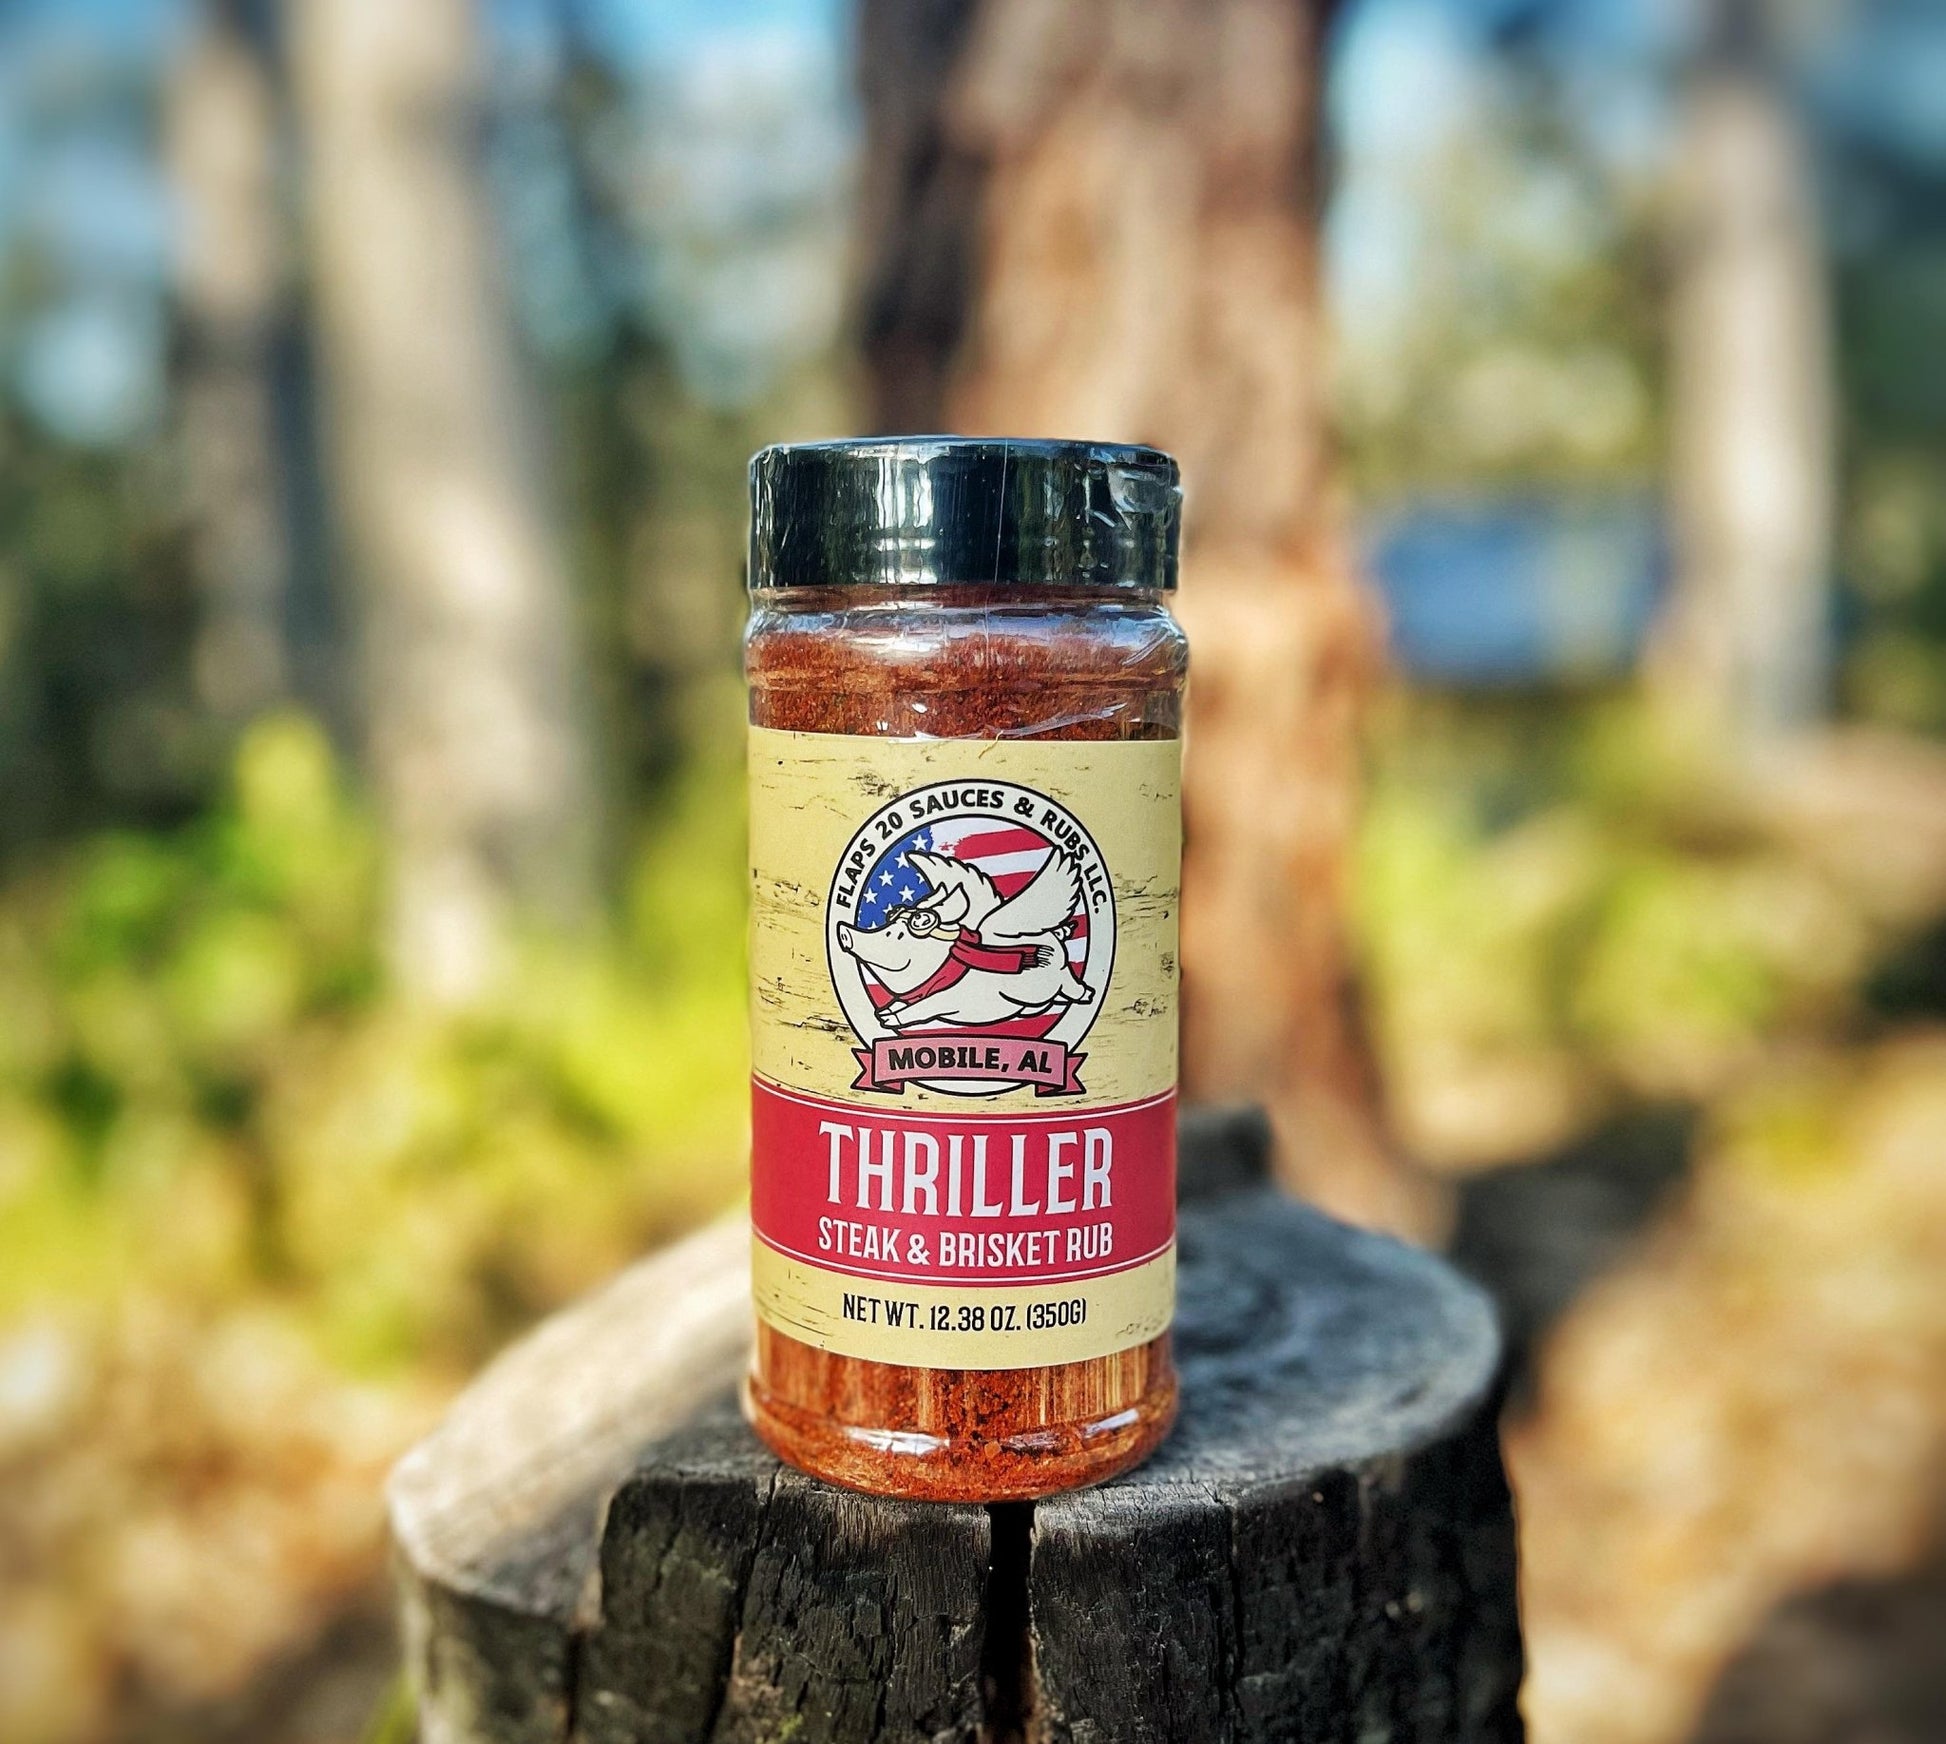 Thriller Texas SOB - Flaps 20 Sauce and Rub - Seasonings & Spices